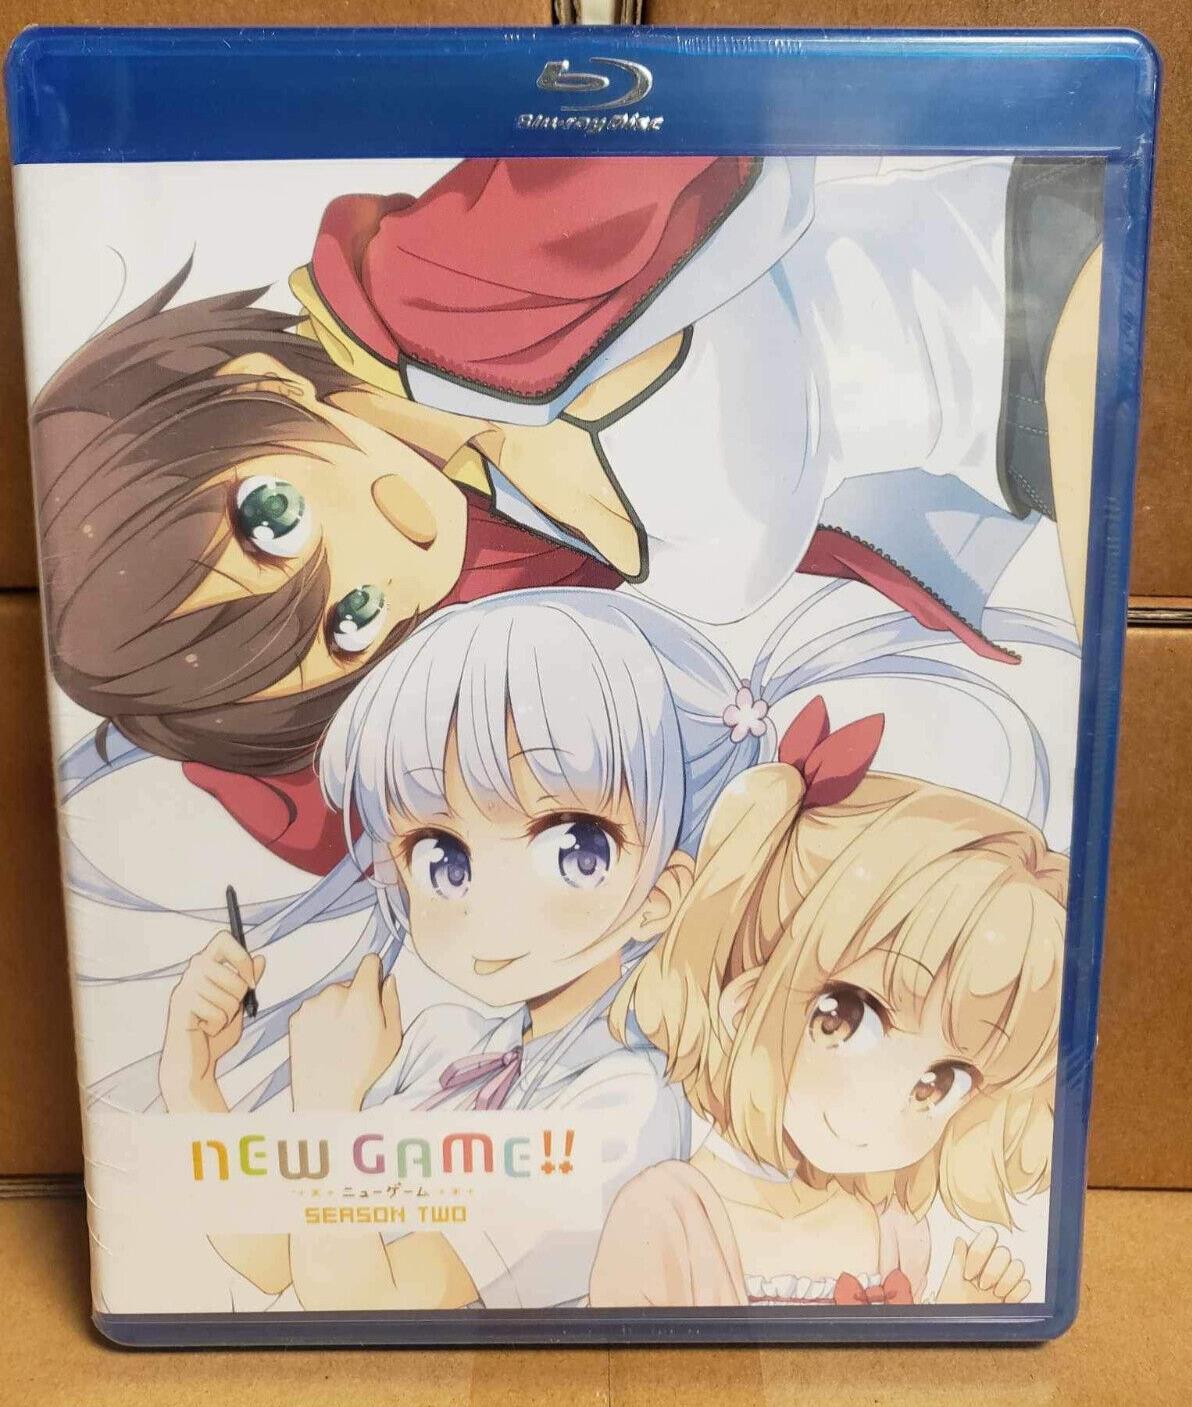 New Game!!: Season Two Funimation Bluray NEW!